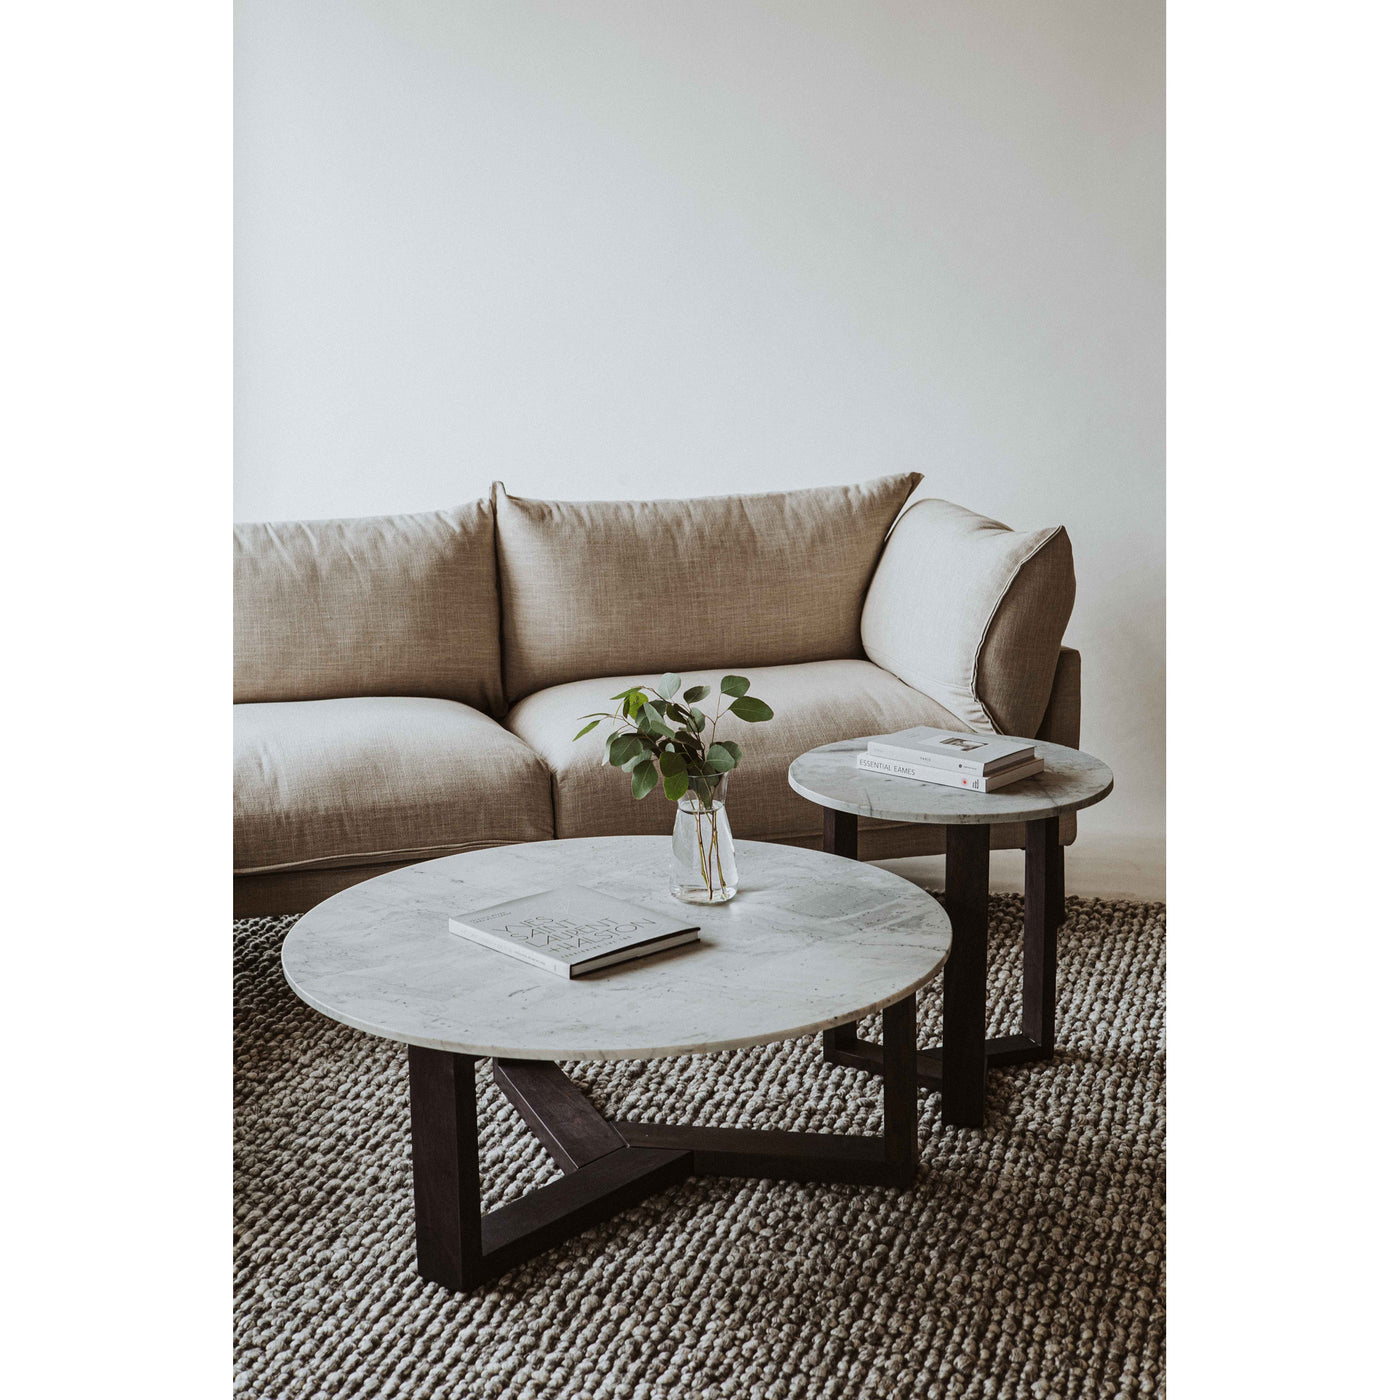 Scandinavian styling, a softly blocked silhouette, and neutral tone in a linen-blend textile, the Jamara left-facing secti...